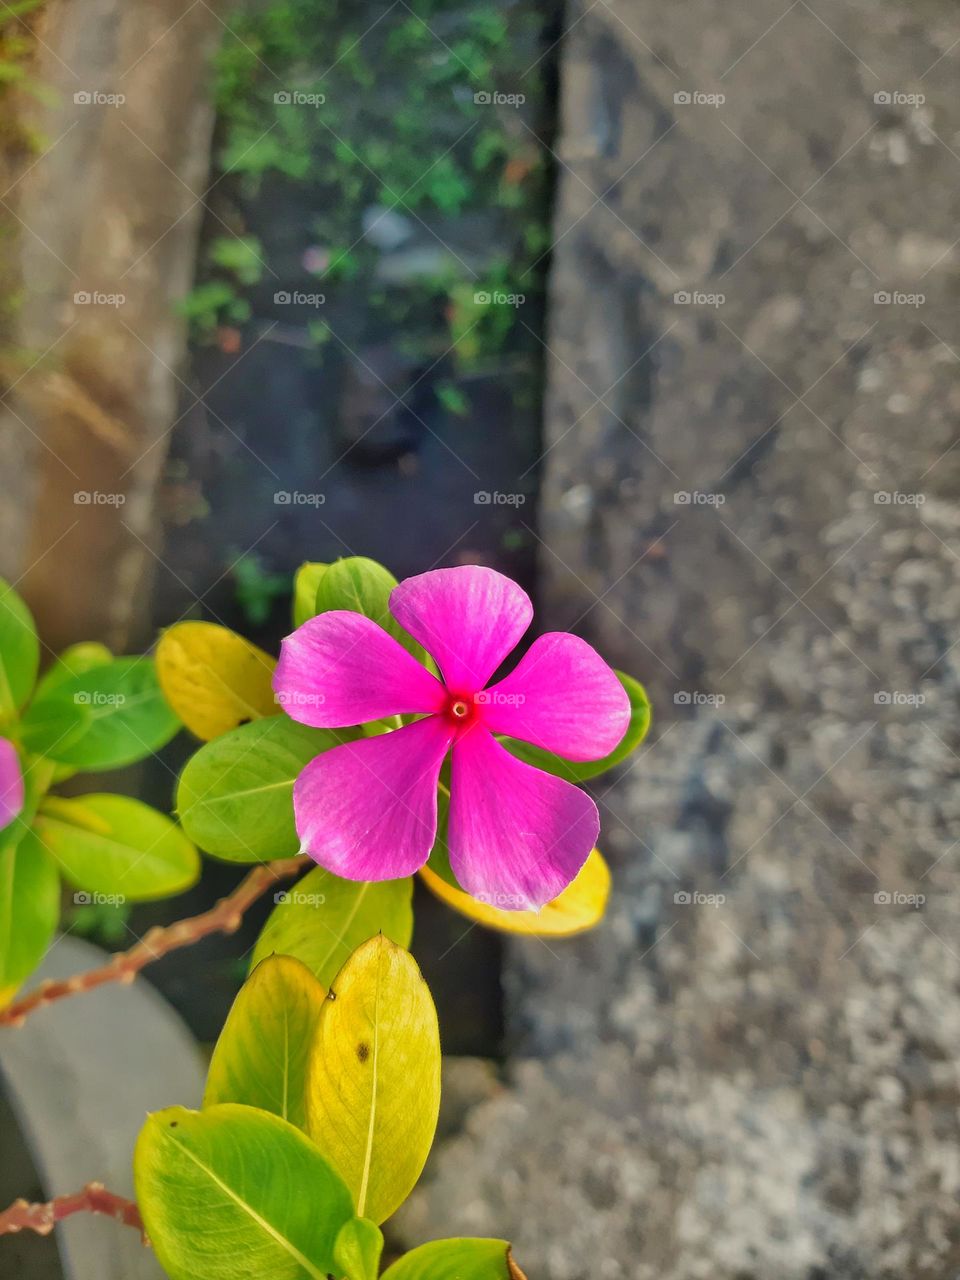 The beauty of nature are well represented by this pink flower. It is known as "Bunga Kertas" in Indonesia which is categorized as tropical country